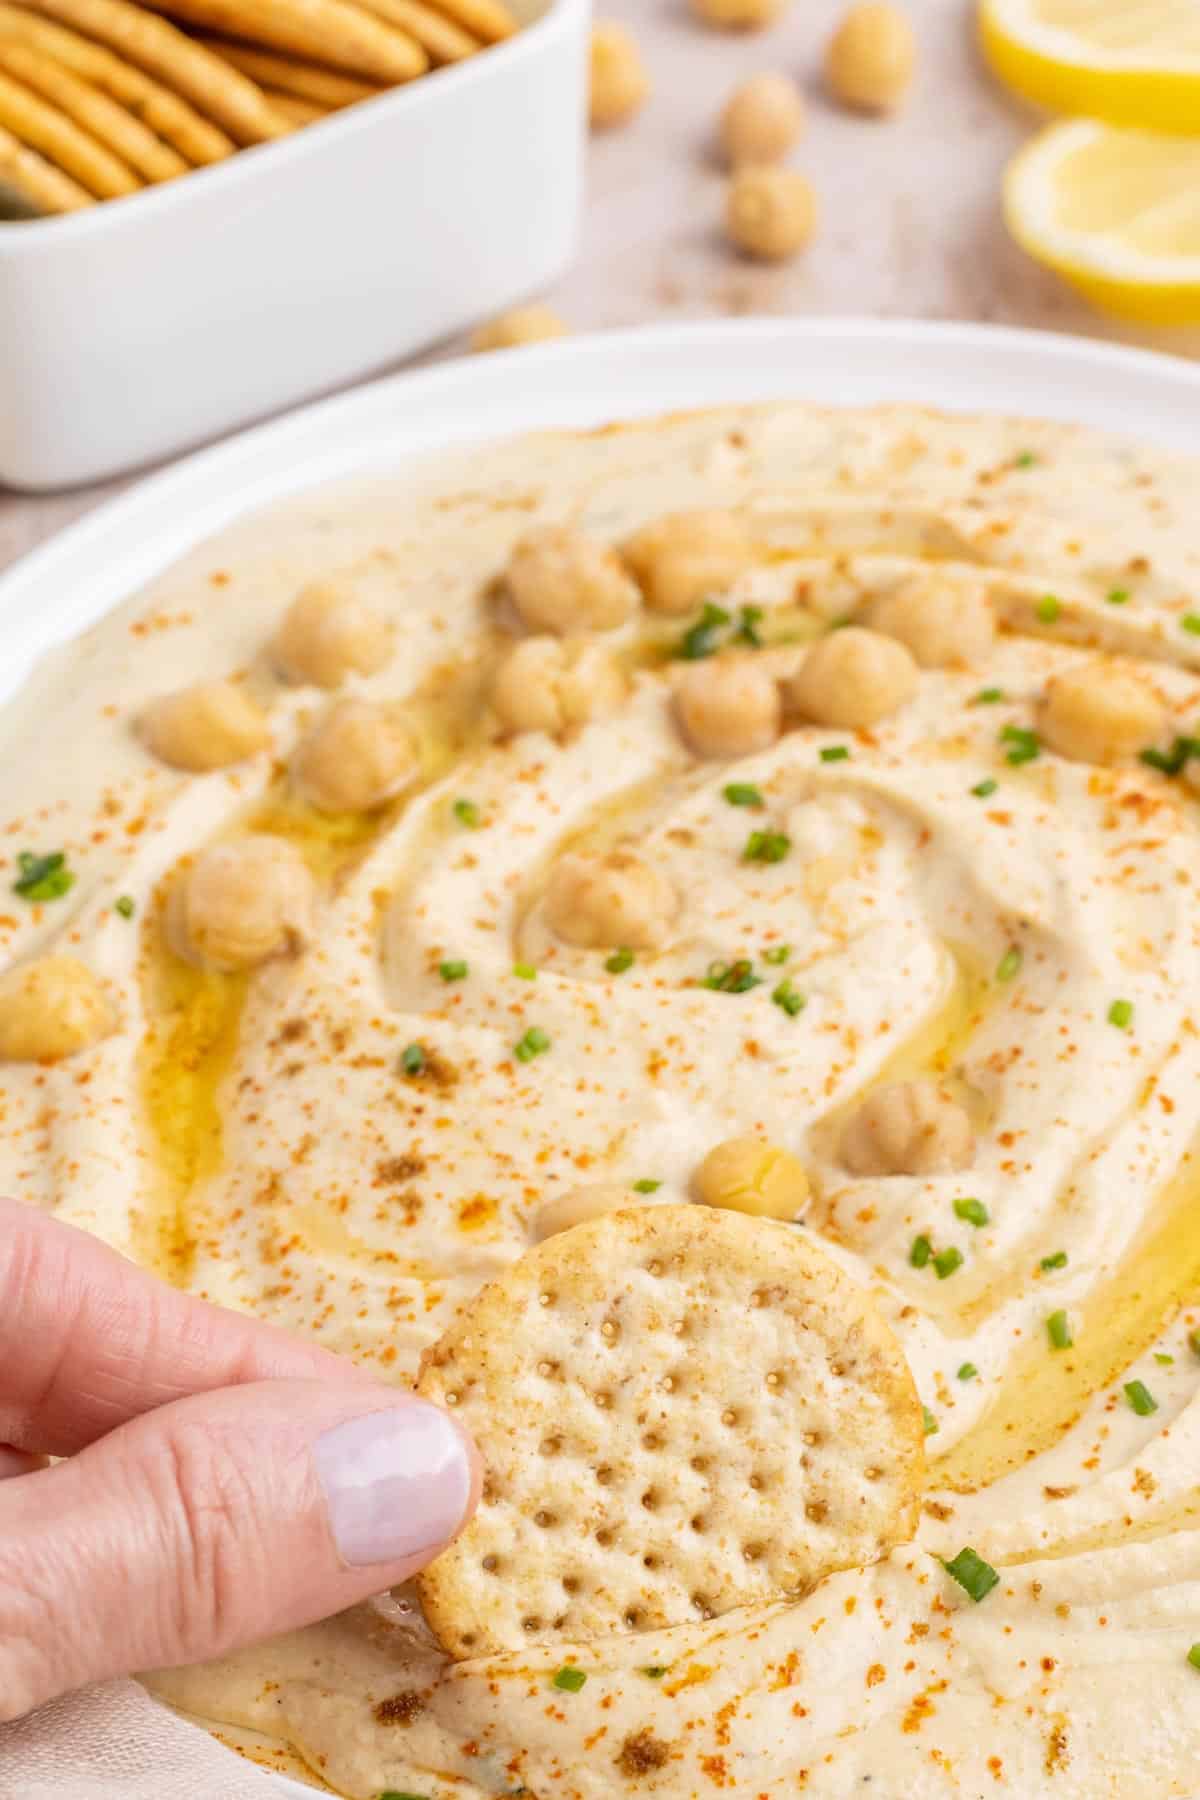 A hand scooping a cracker into hummus.